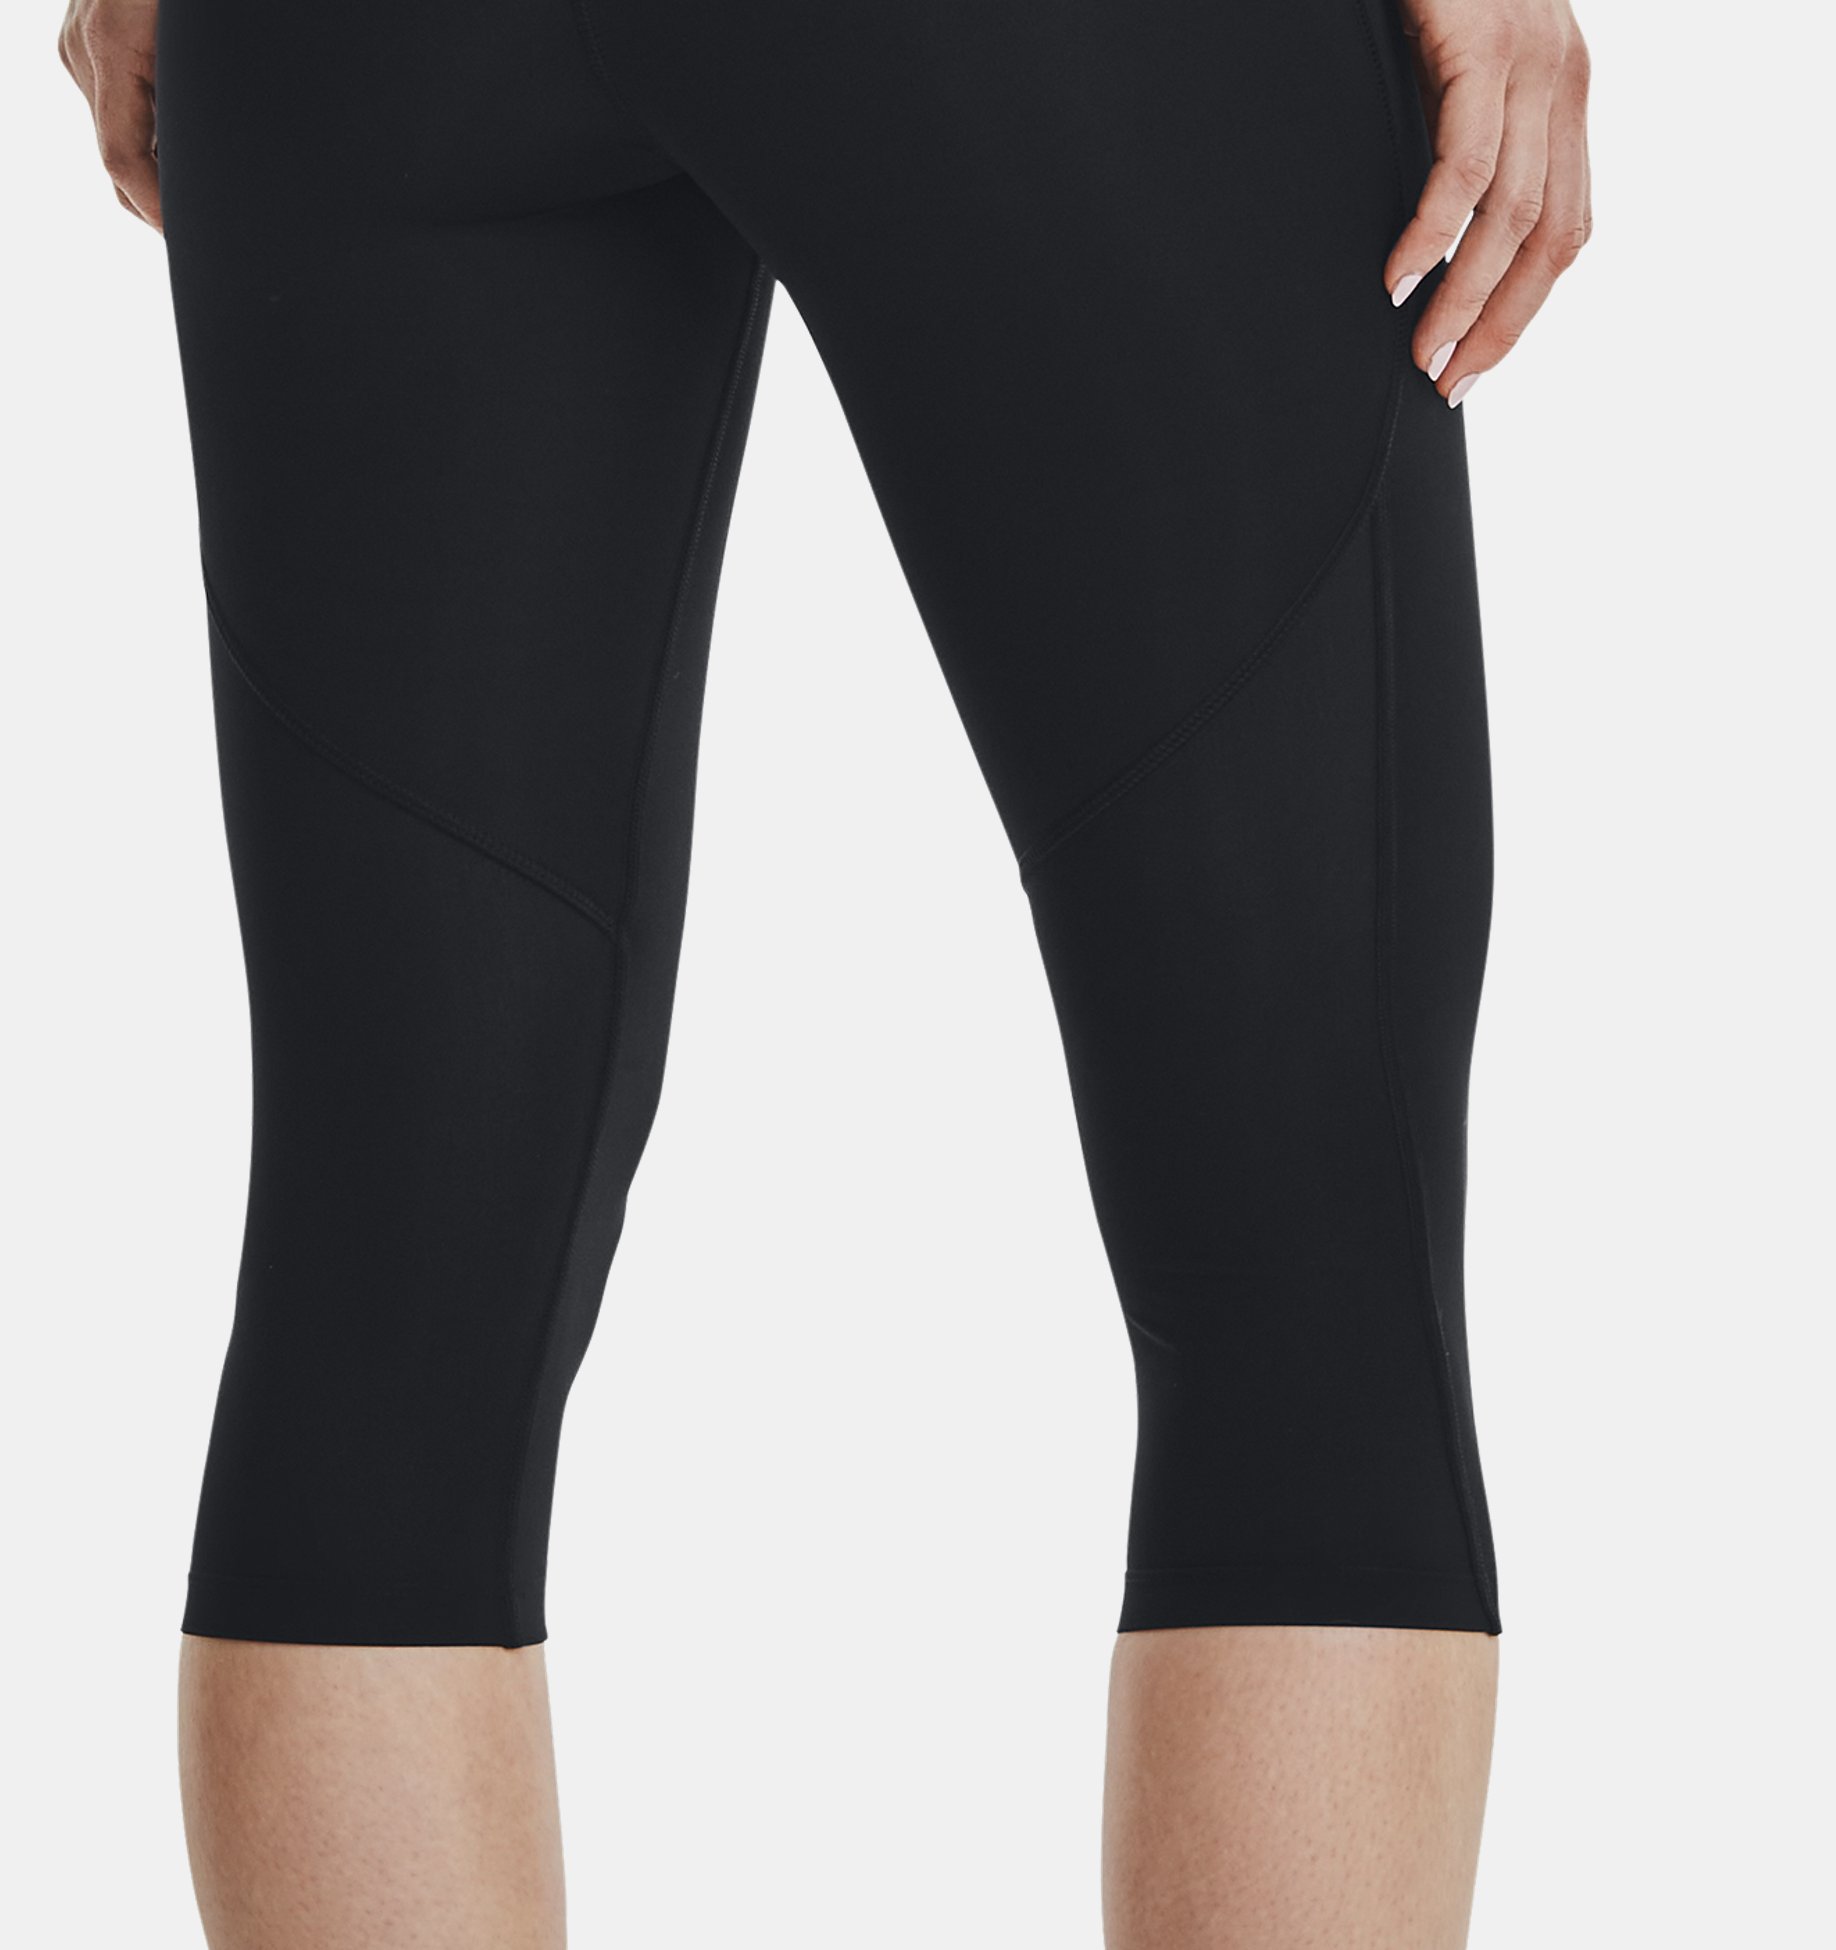 Womens Under Armour UA Fly-By Compression Capri Tights